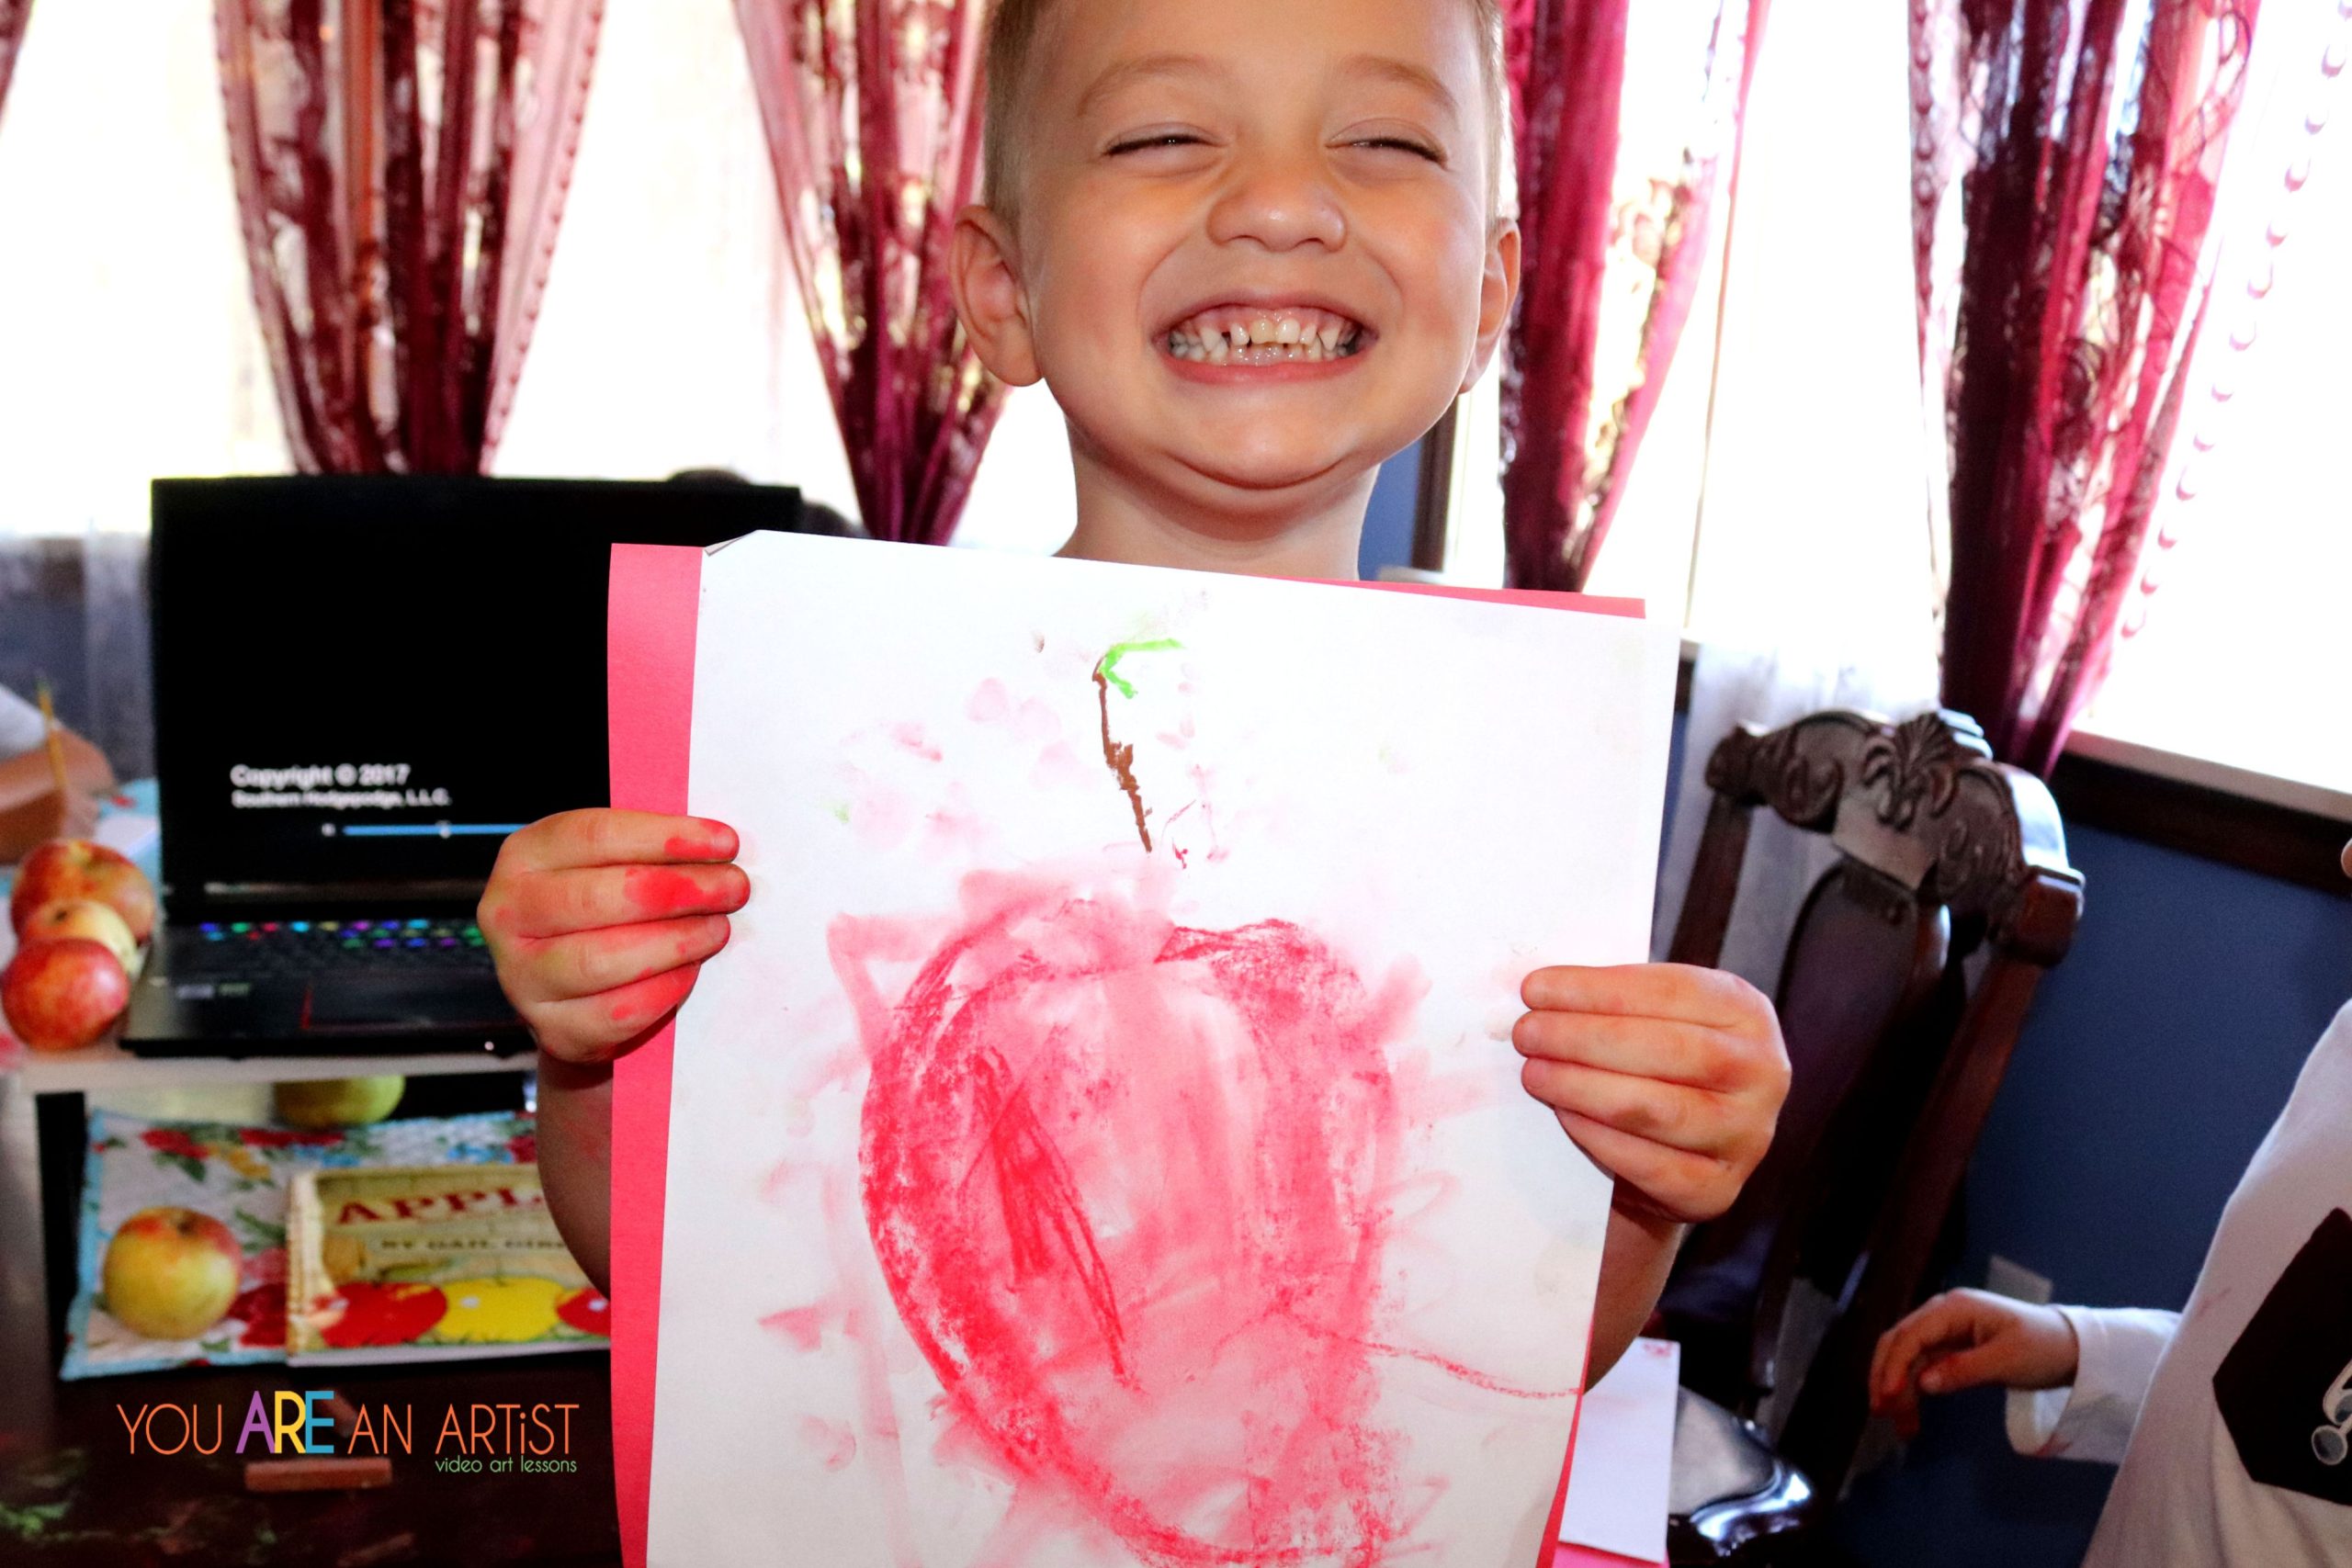 s! I love the joy on my son’s face when he paints with Nana!